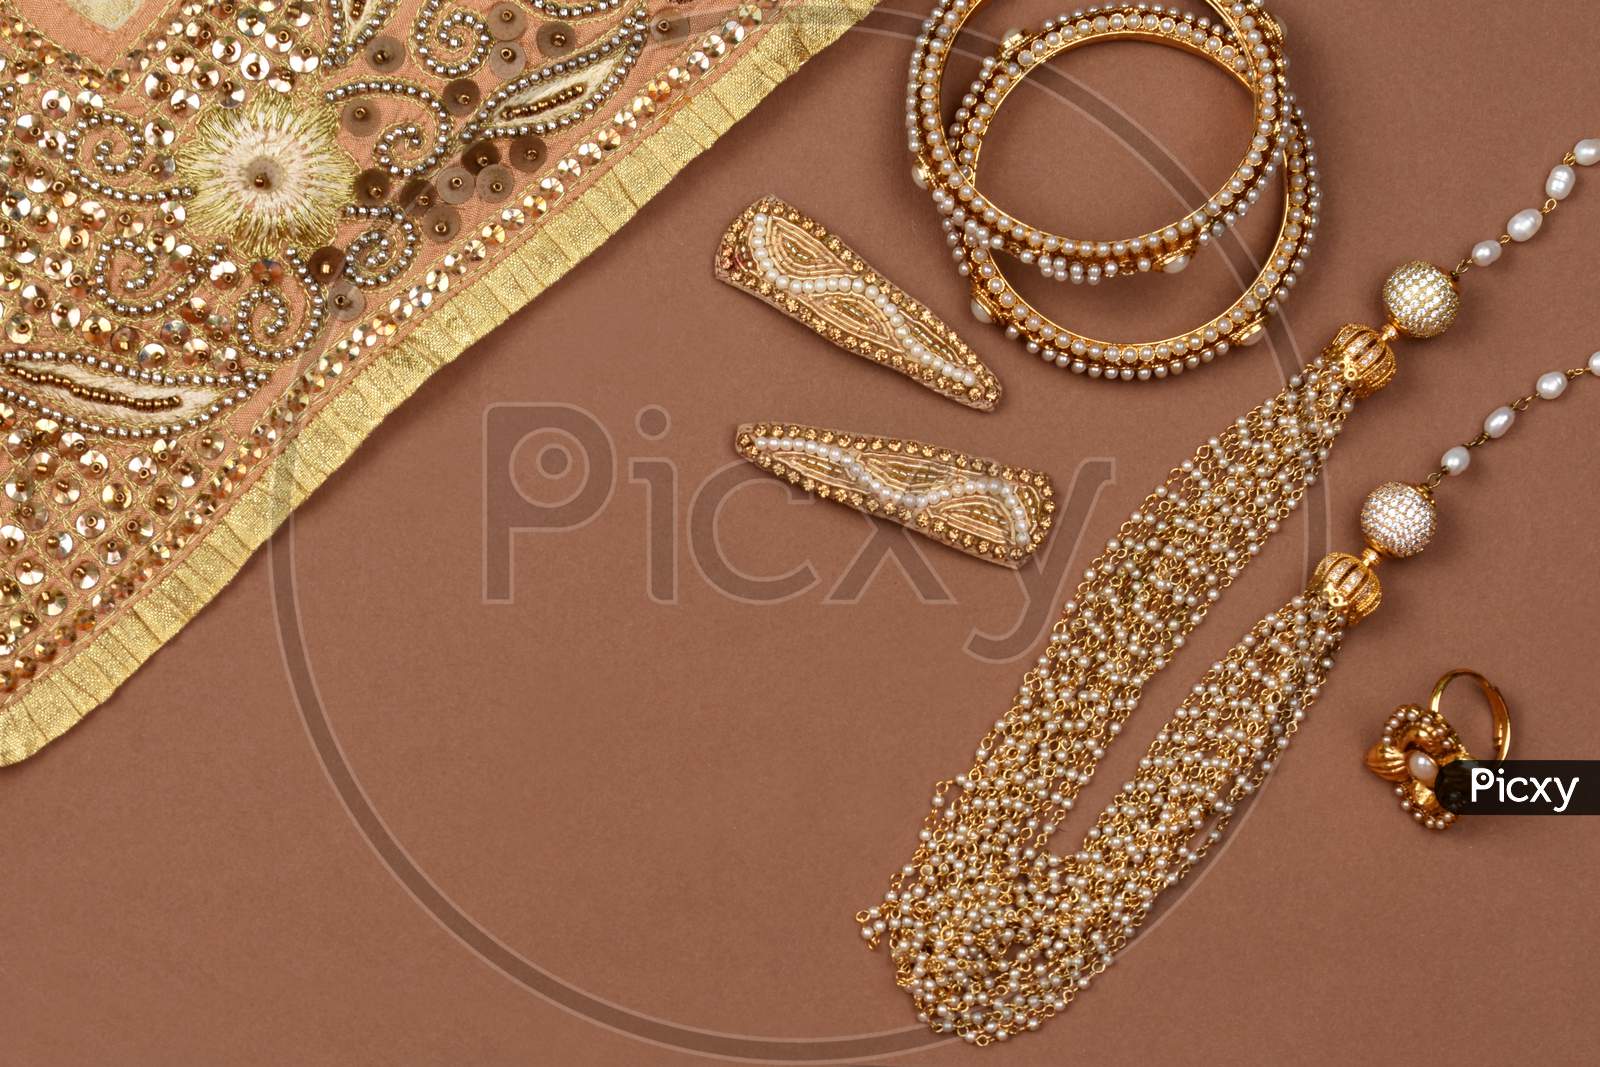 Pearl Jewelry On A Brown Background, Golden Scarf, Pearl Bracelet, Pearl Hair Clip, Pearl Necklacejewelry Background, Finger Ring.Style, Fashion And Design Of Jewelry. Indian Traditional Jewellery